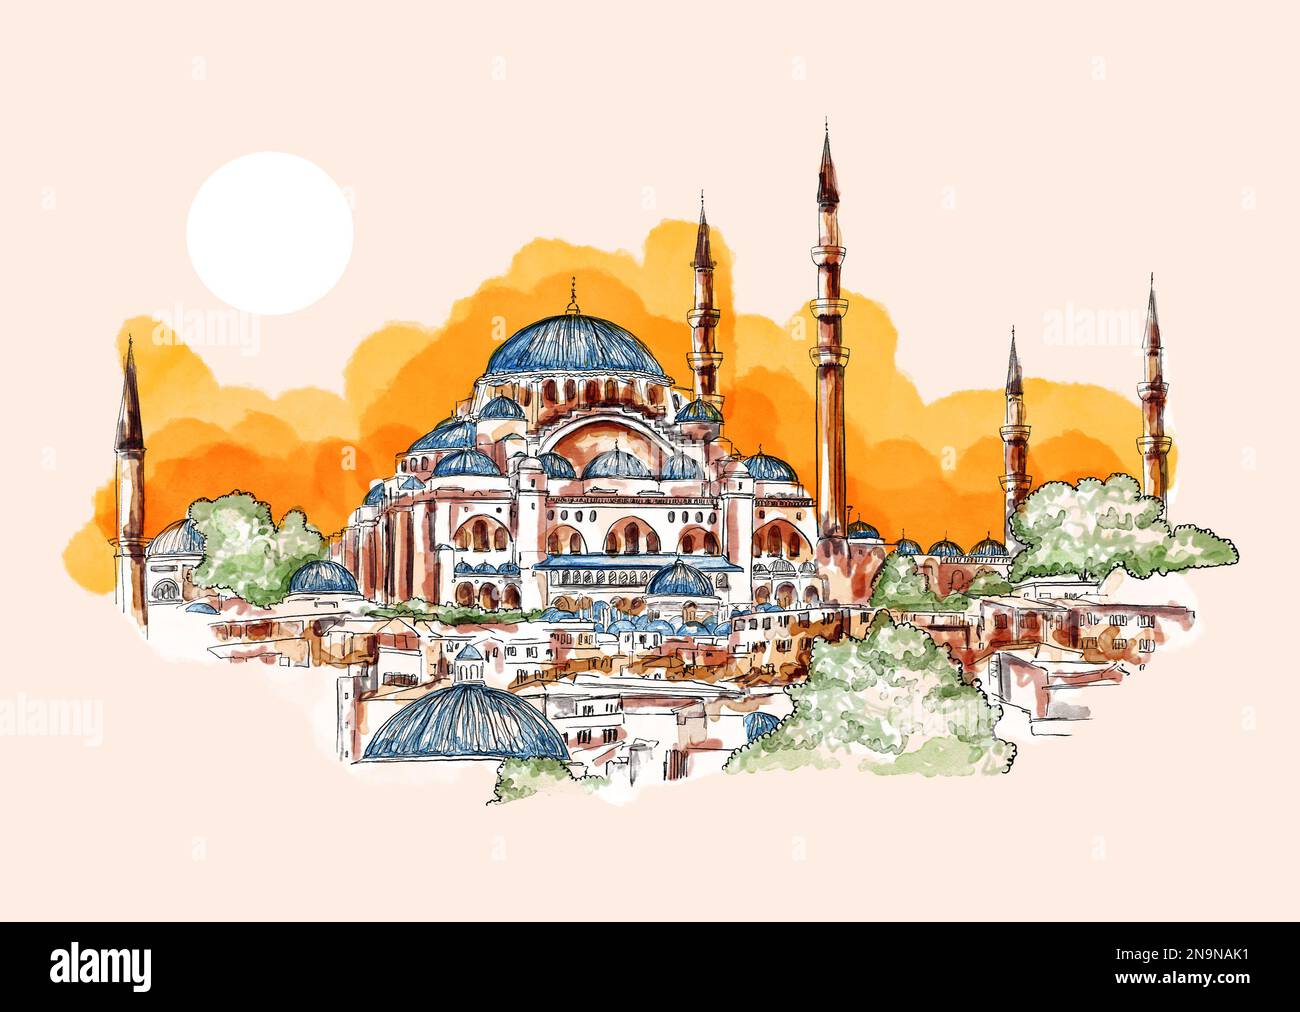 Watercolor hand drawn sketch of Aya Sofya, Hagia Sophia Mosque, Istanbul, Turkey. A famous sightseeing of Turkey. Stock Photo